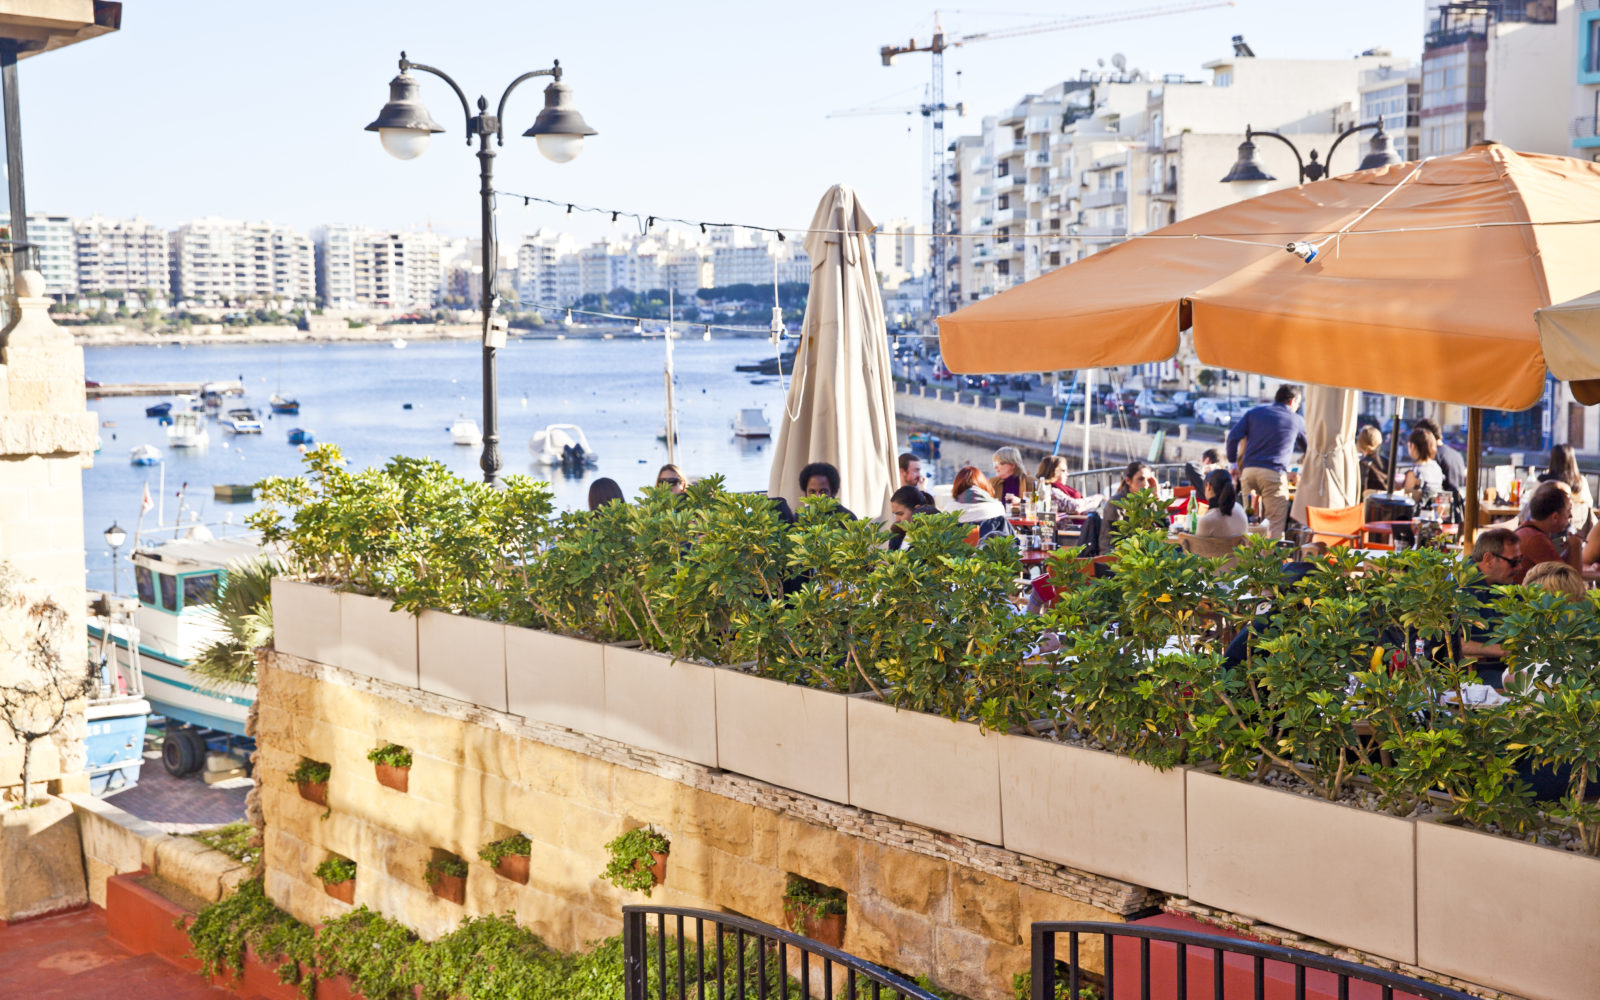 Malta Quallity Restaurant seaside and outdoor seating